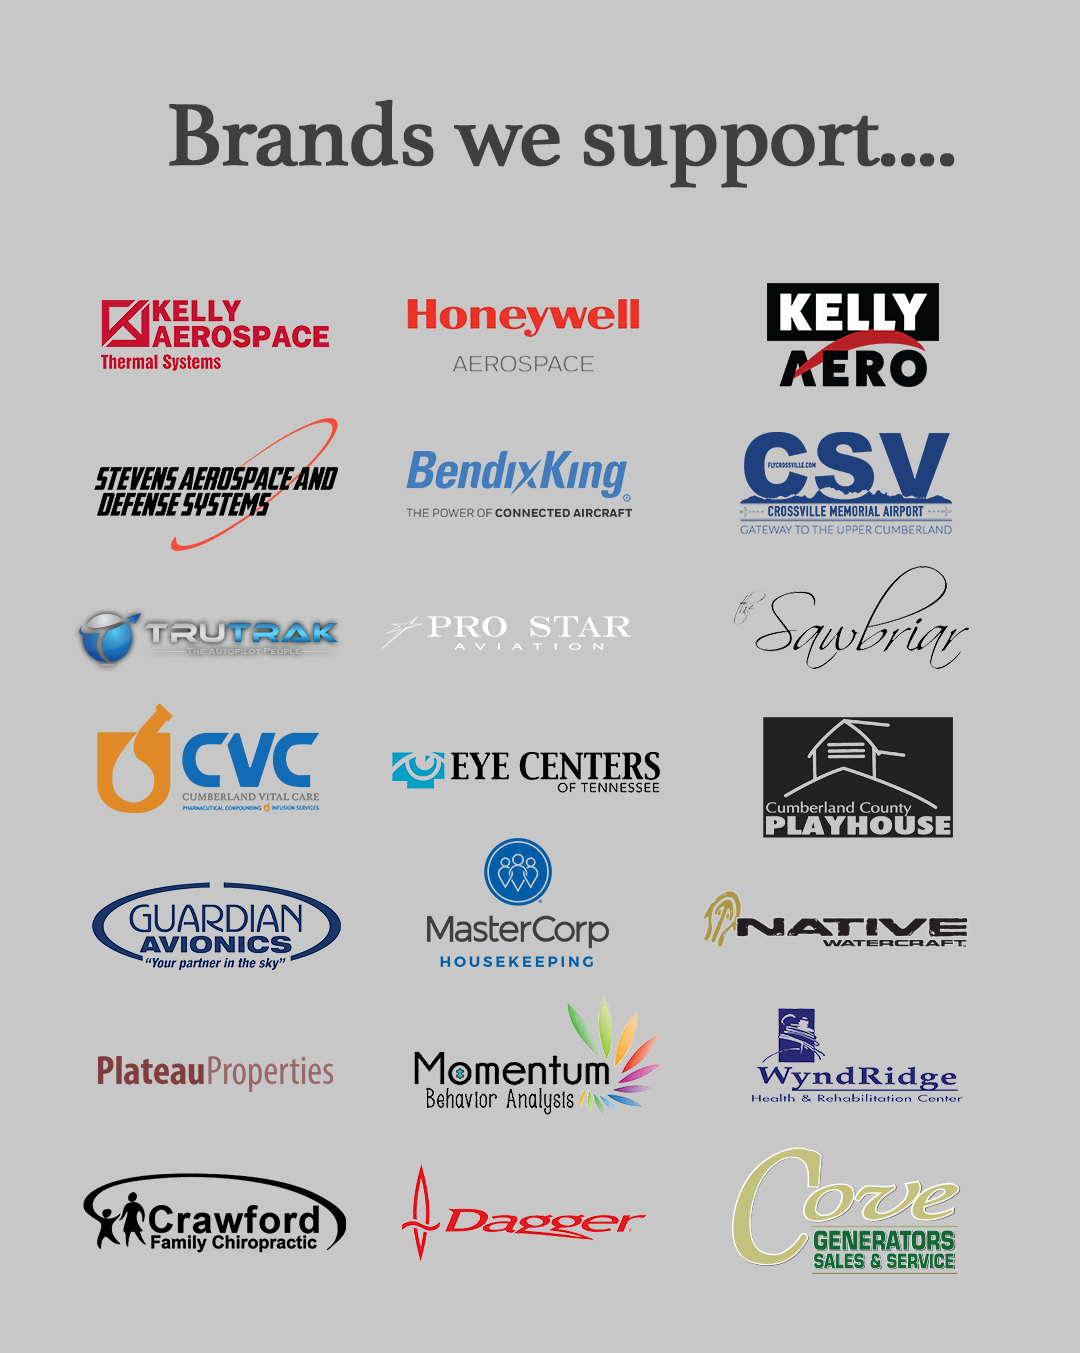 We support these brands with digital marketing in Crossville!